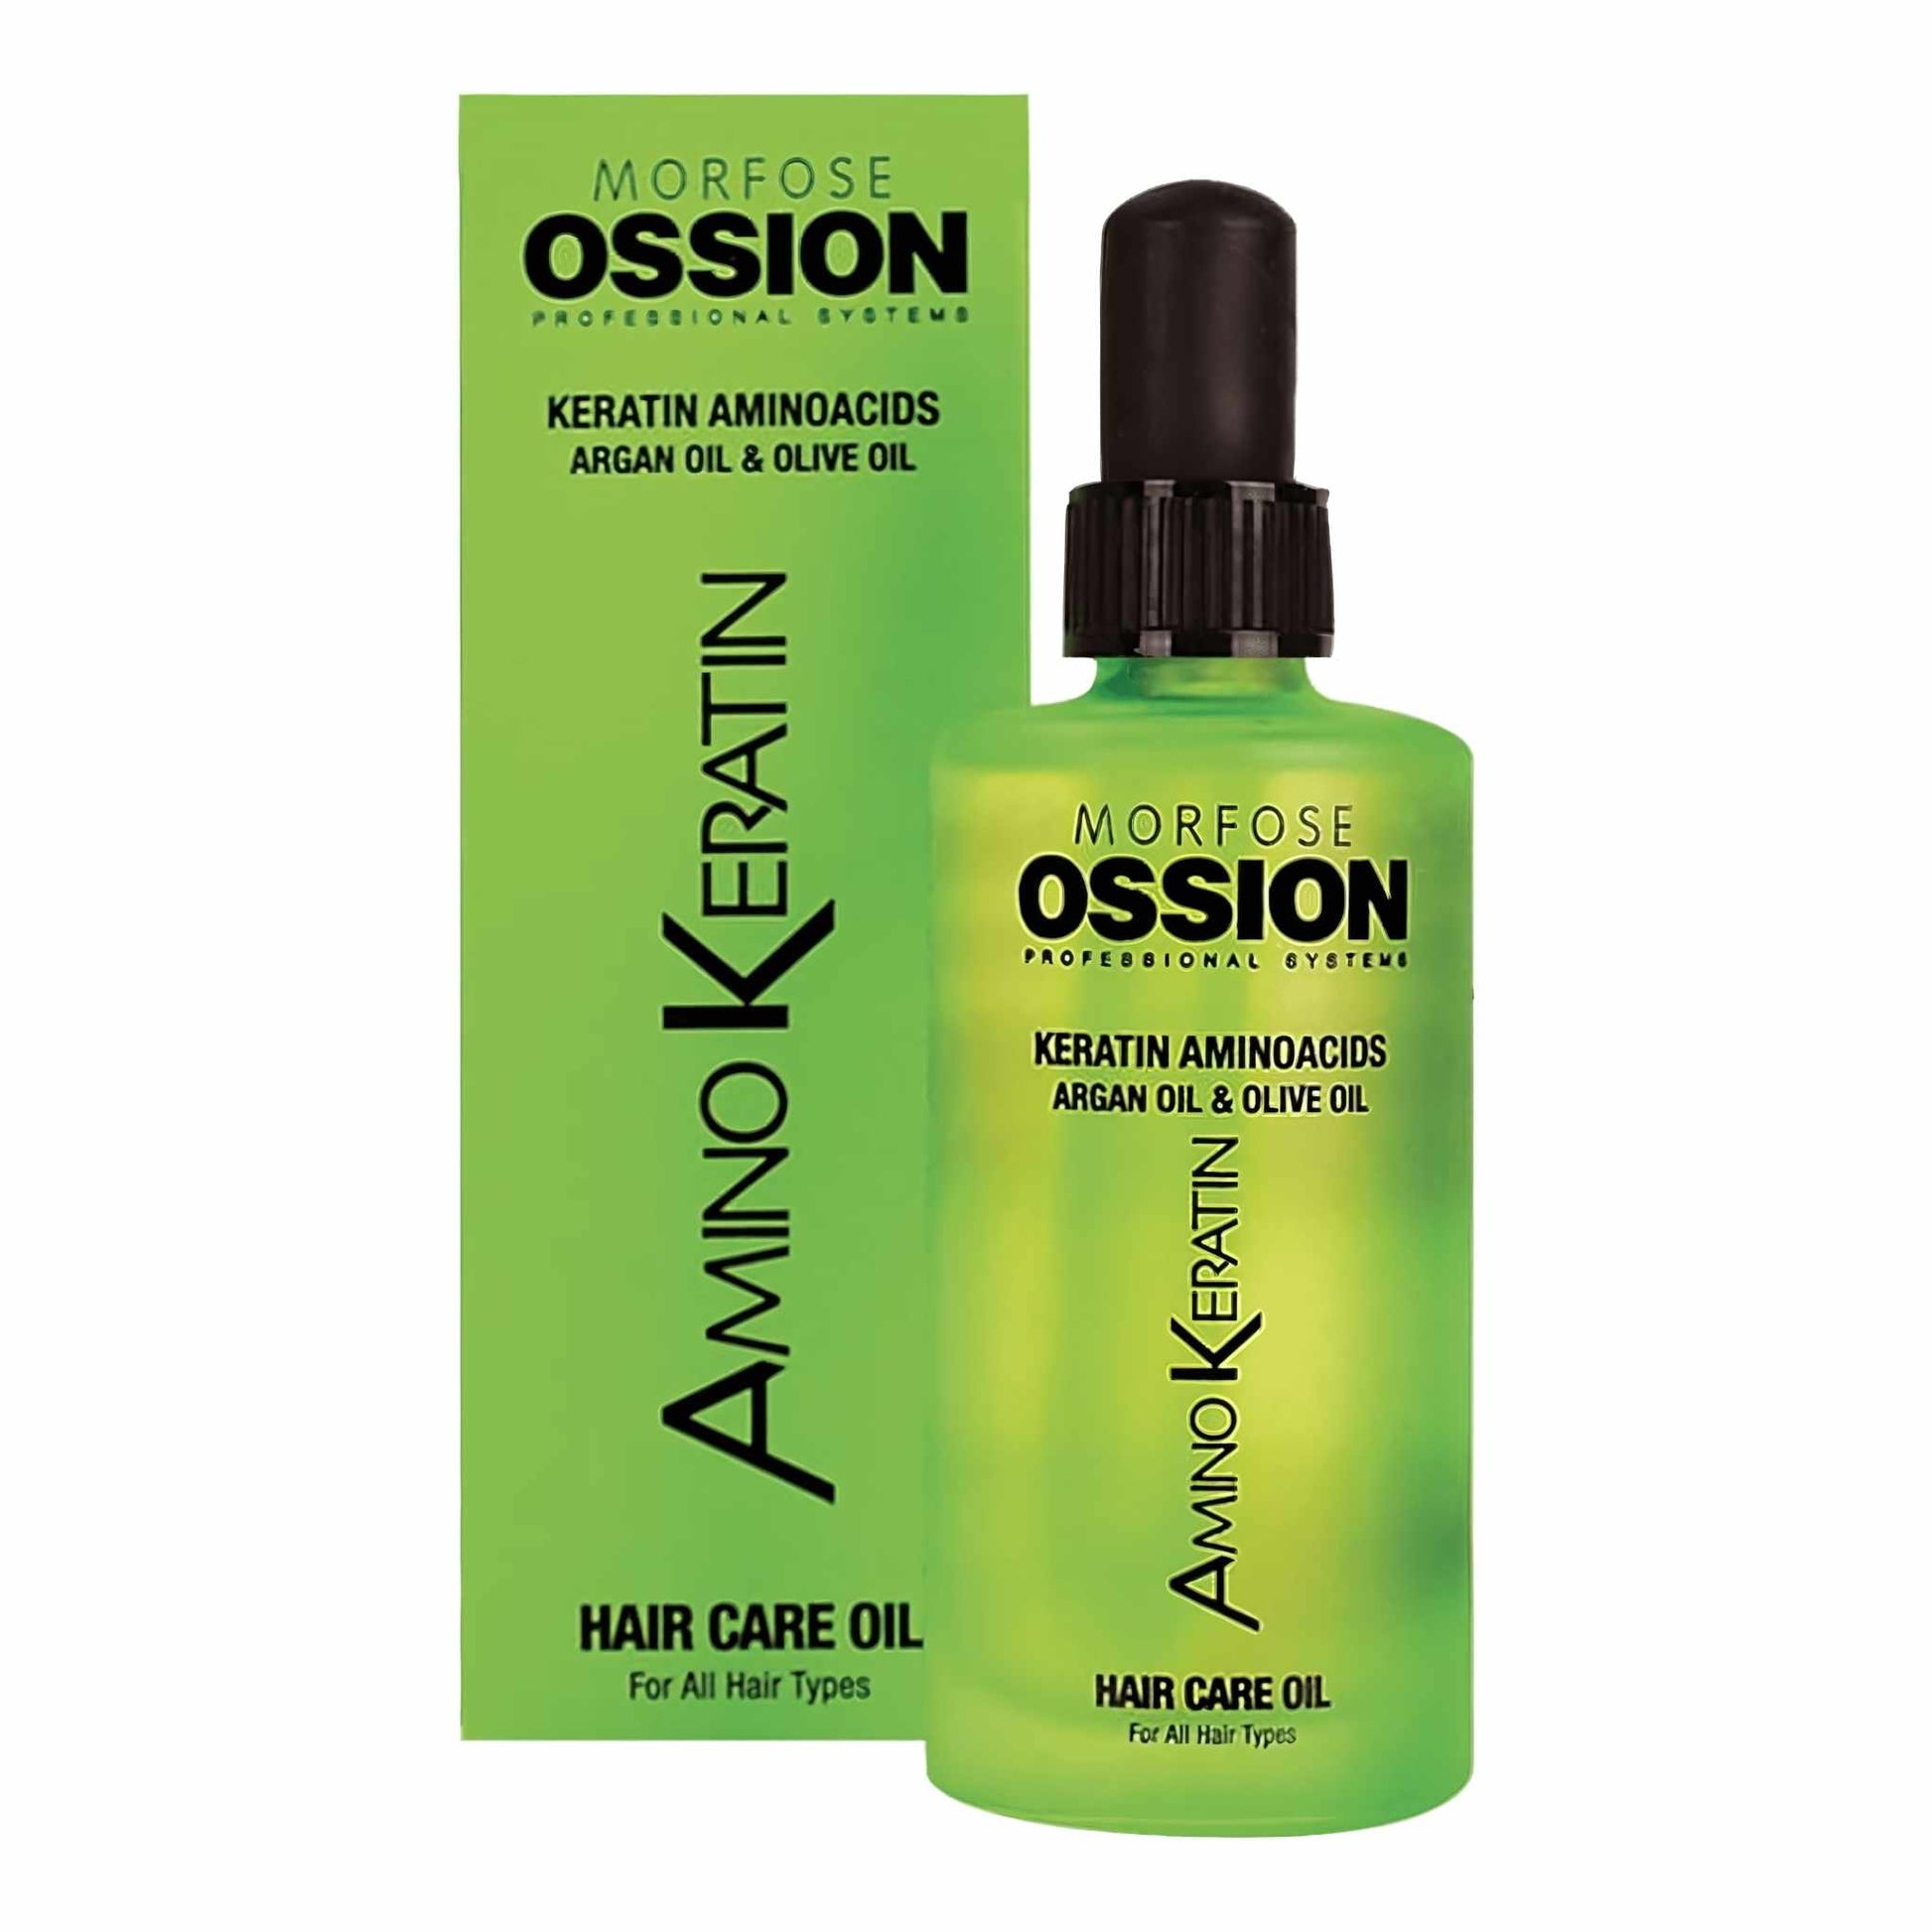 Morfose Ossion Amino Keratin Hair Care Oil 100 ml For All Hair Types